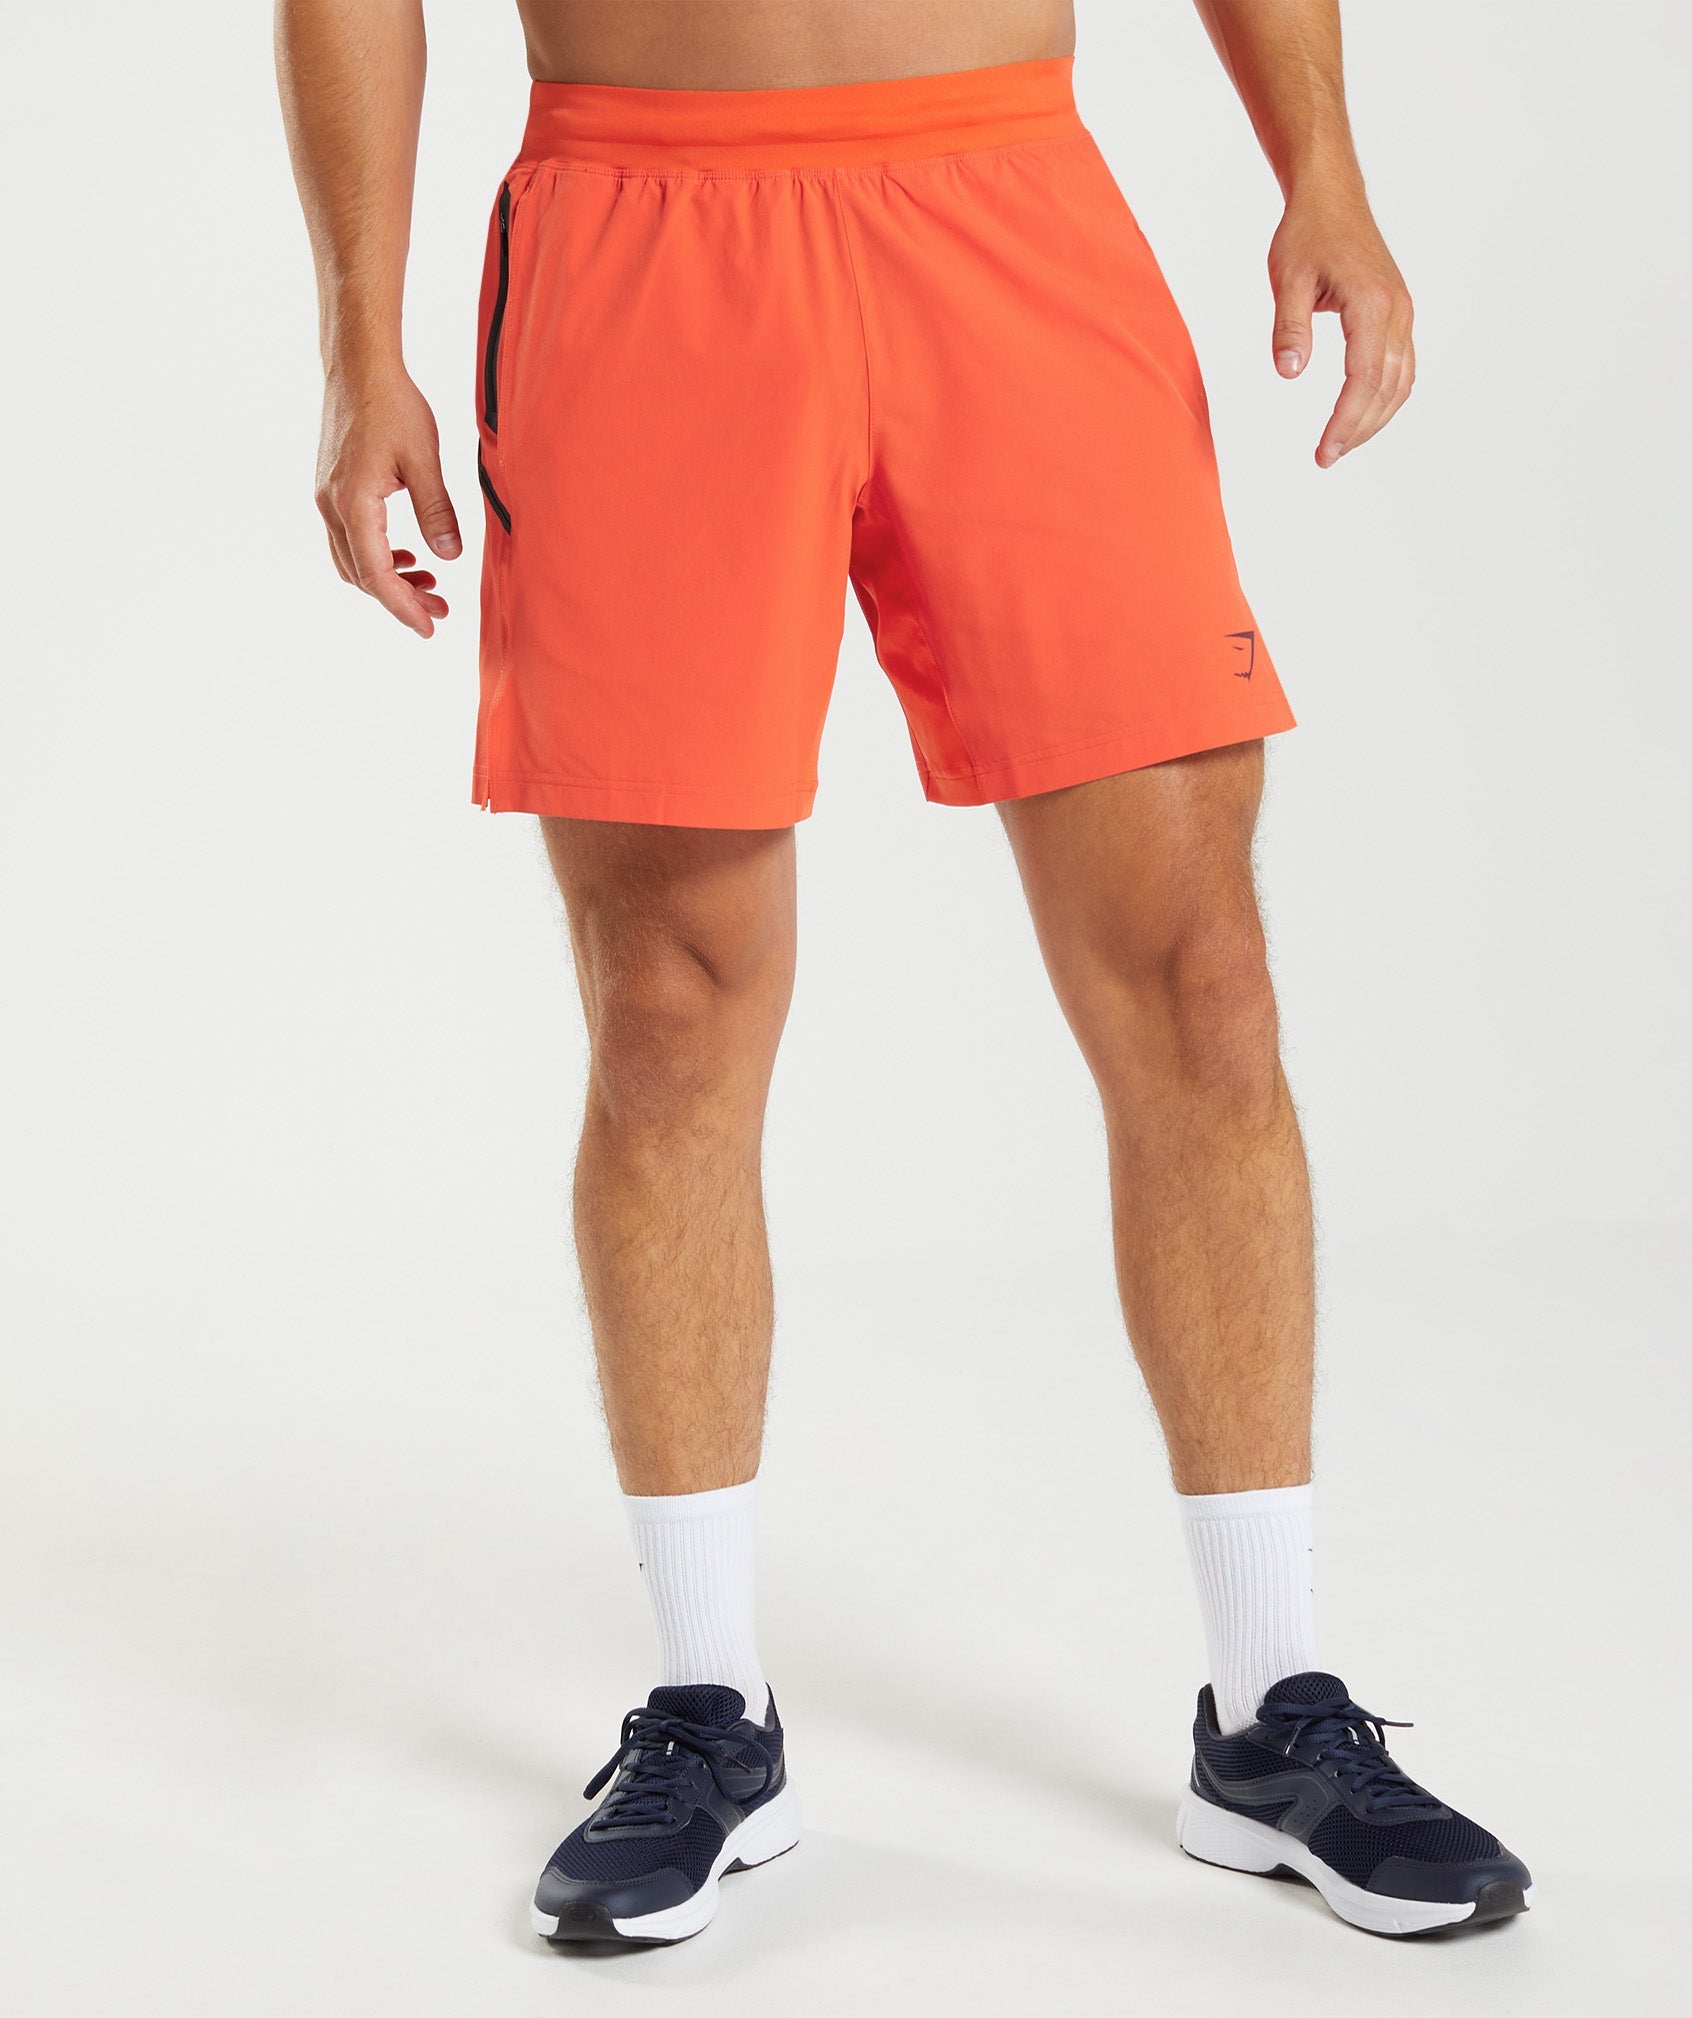 Apex 8" Function Shorts in Pepper Red - view 1